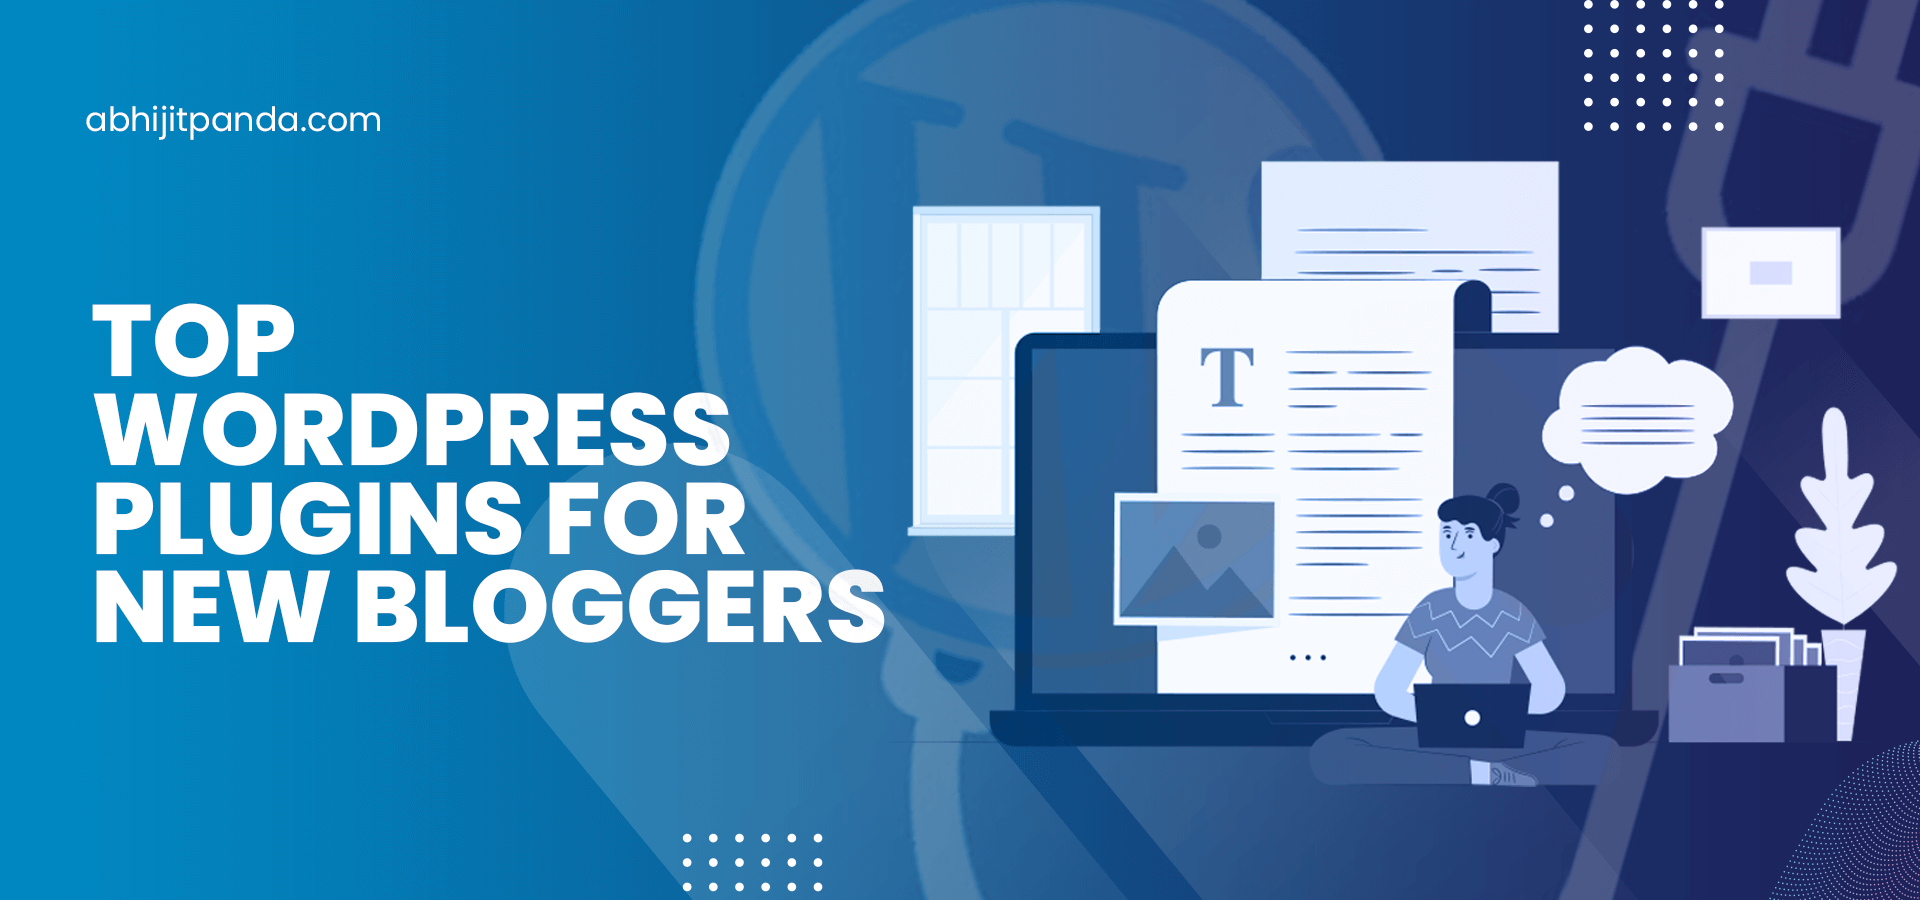 Top WordPress Plugins for New Bloggers